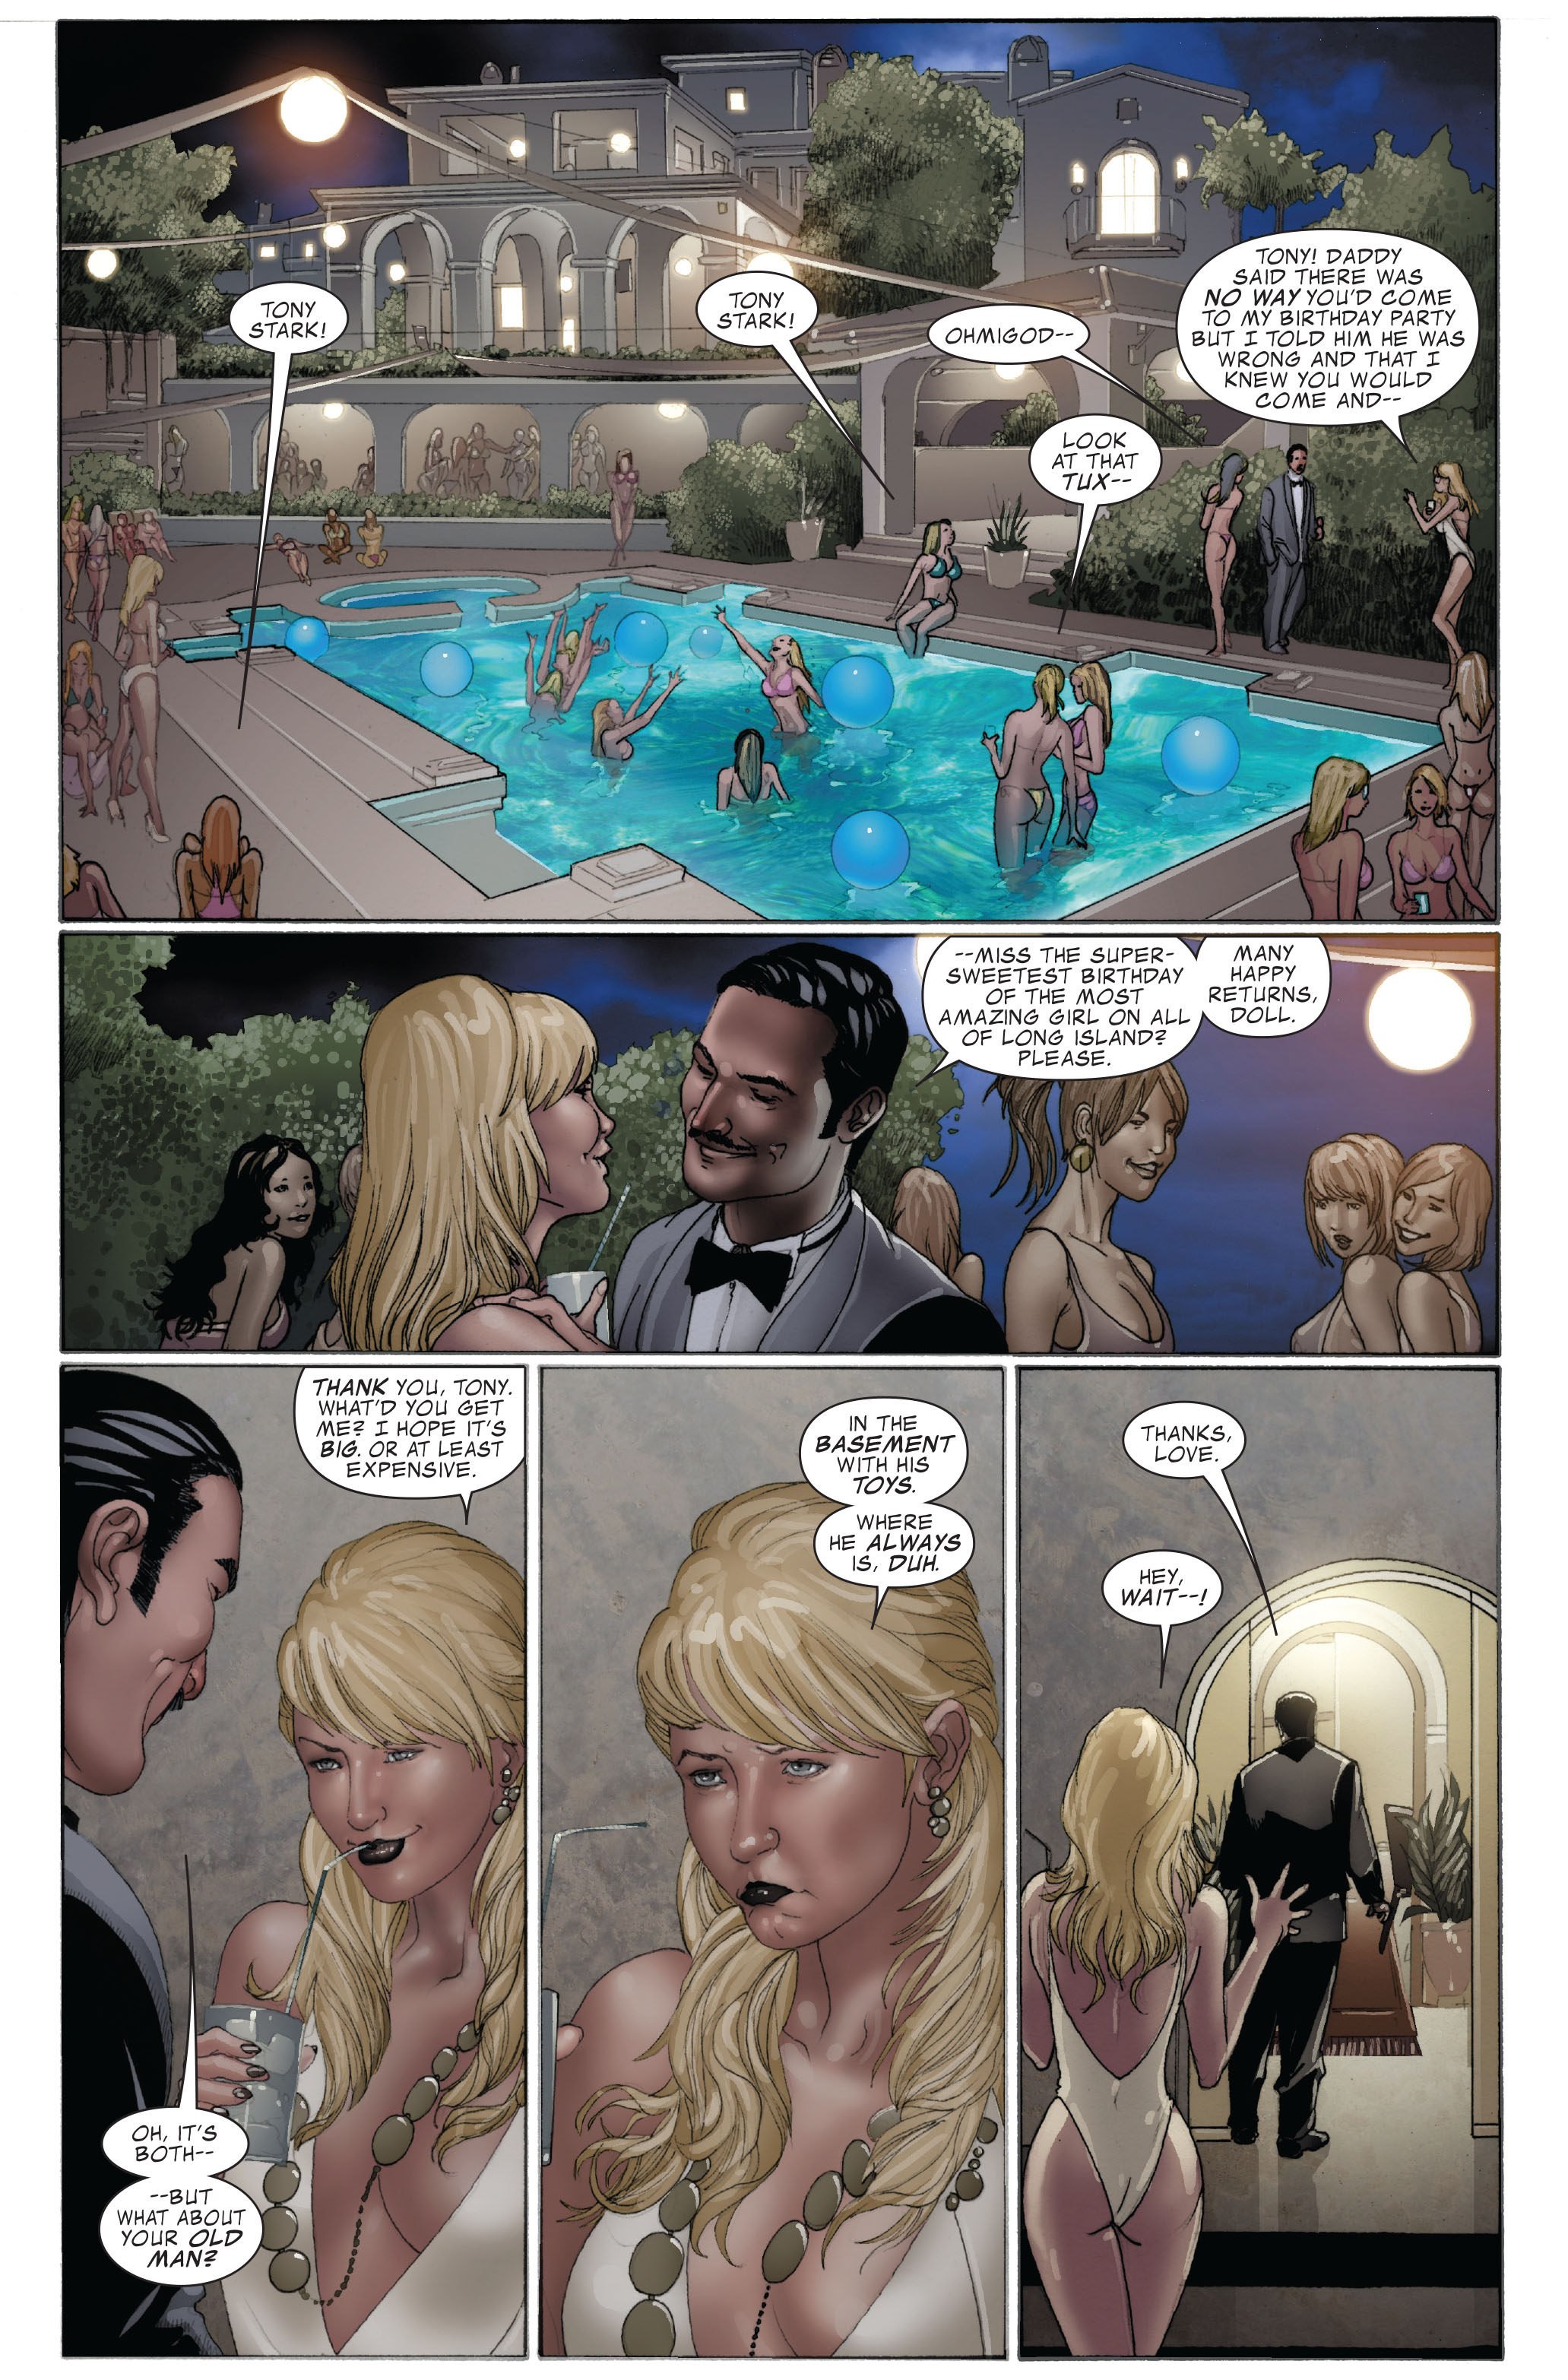 Invincible Iron Man (2008) 7 Page 19